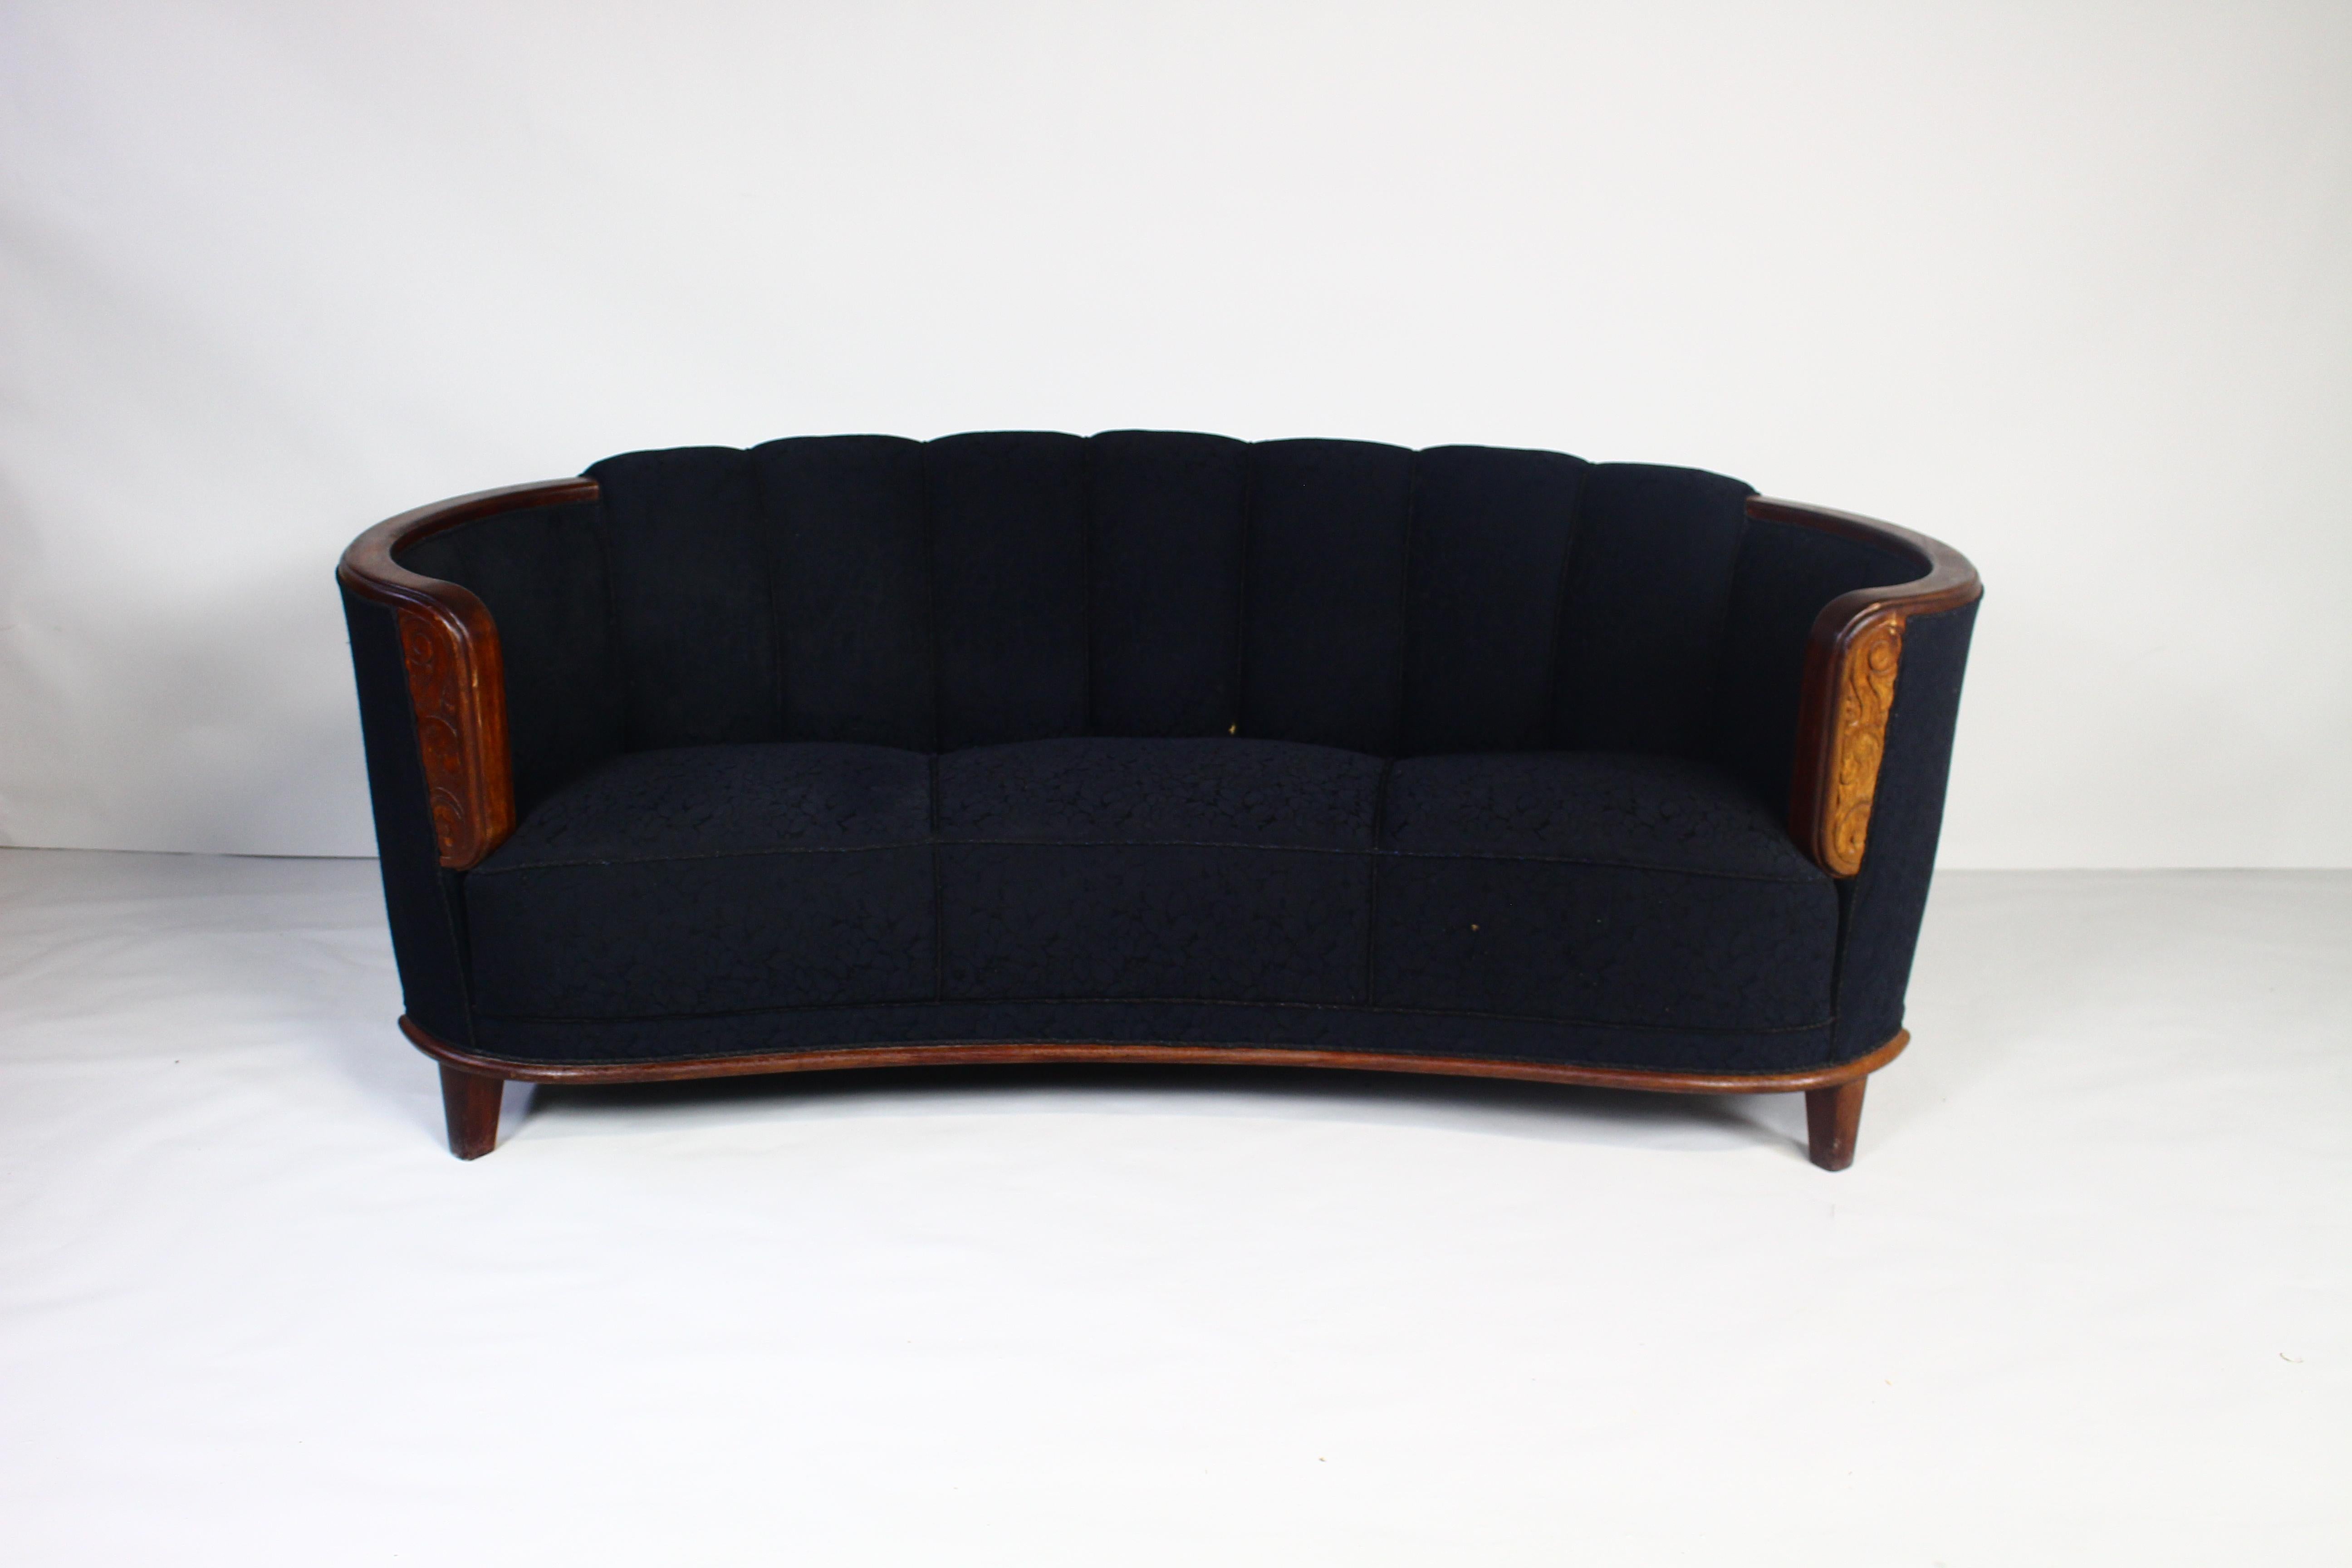 This beautiful Danish three-seater sofa recalls the Art Deco style of the 1930s with the recognizable touch of Danish Modernism.
Thanks to its elegantly curved shape, this type of sofa is often referred to as the “banana” style,which not only